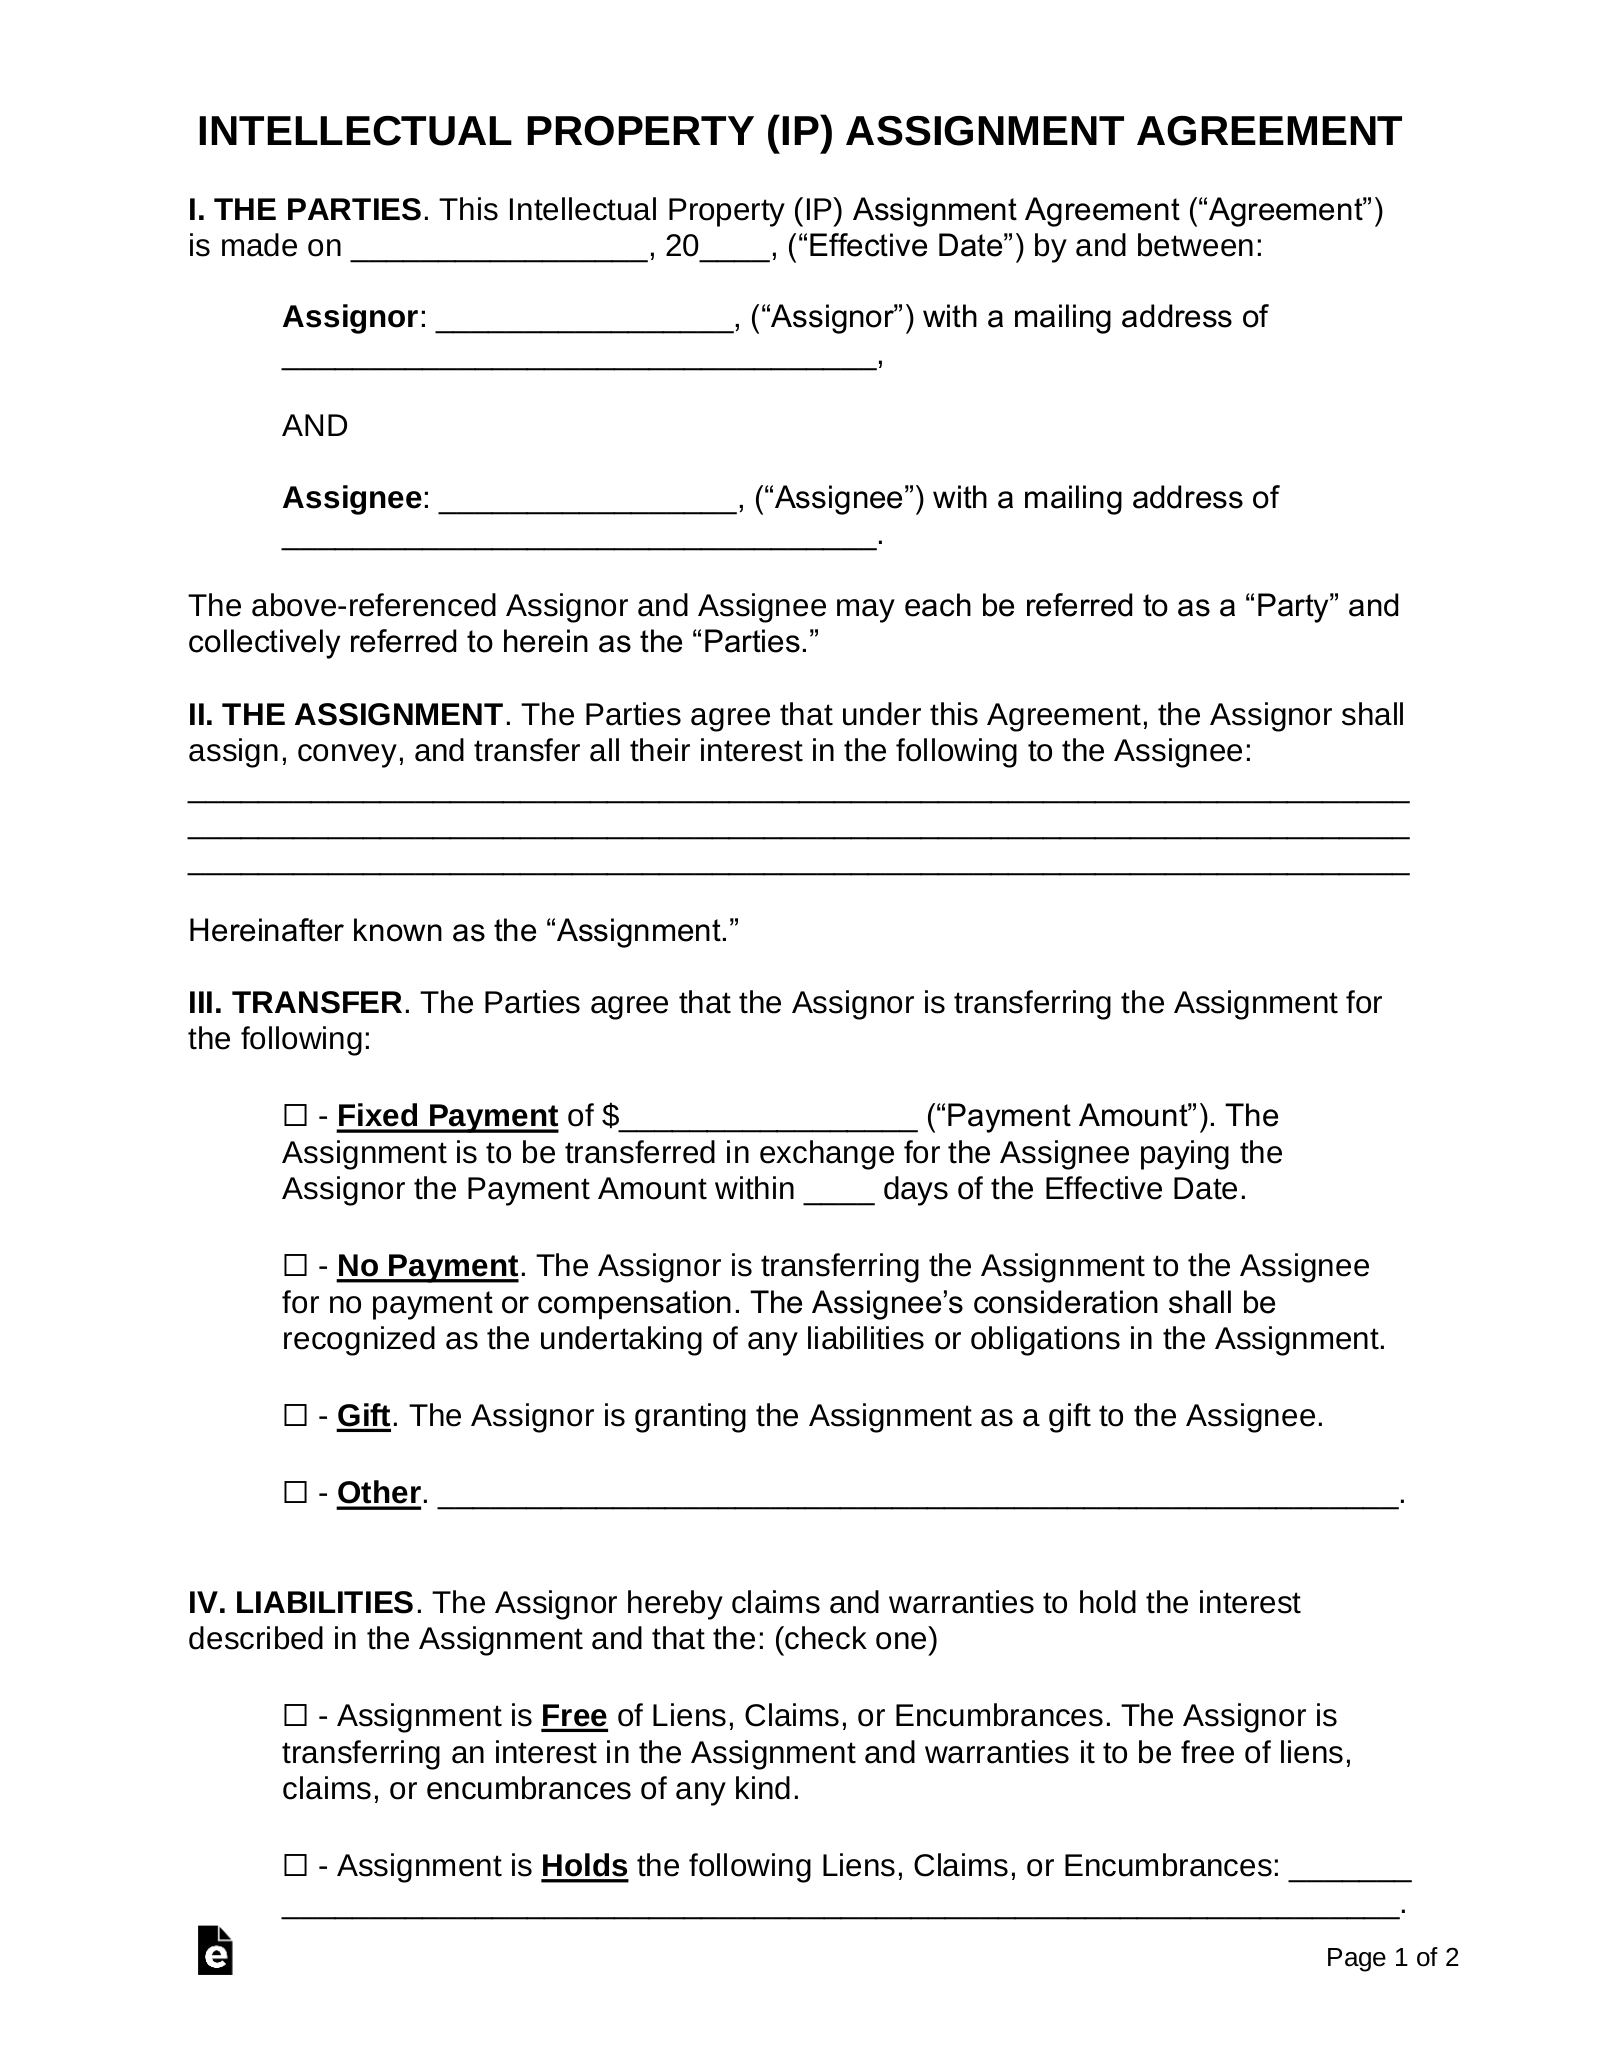 assignment agreement form